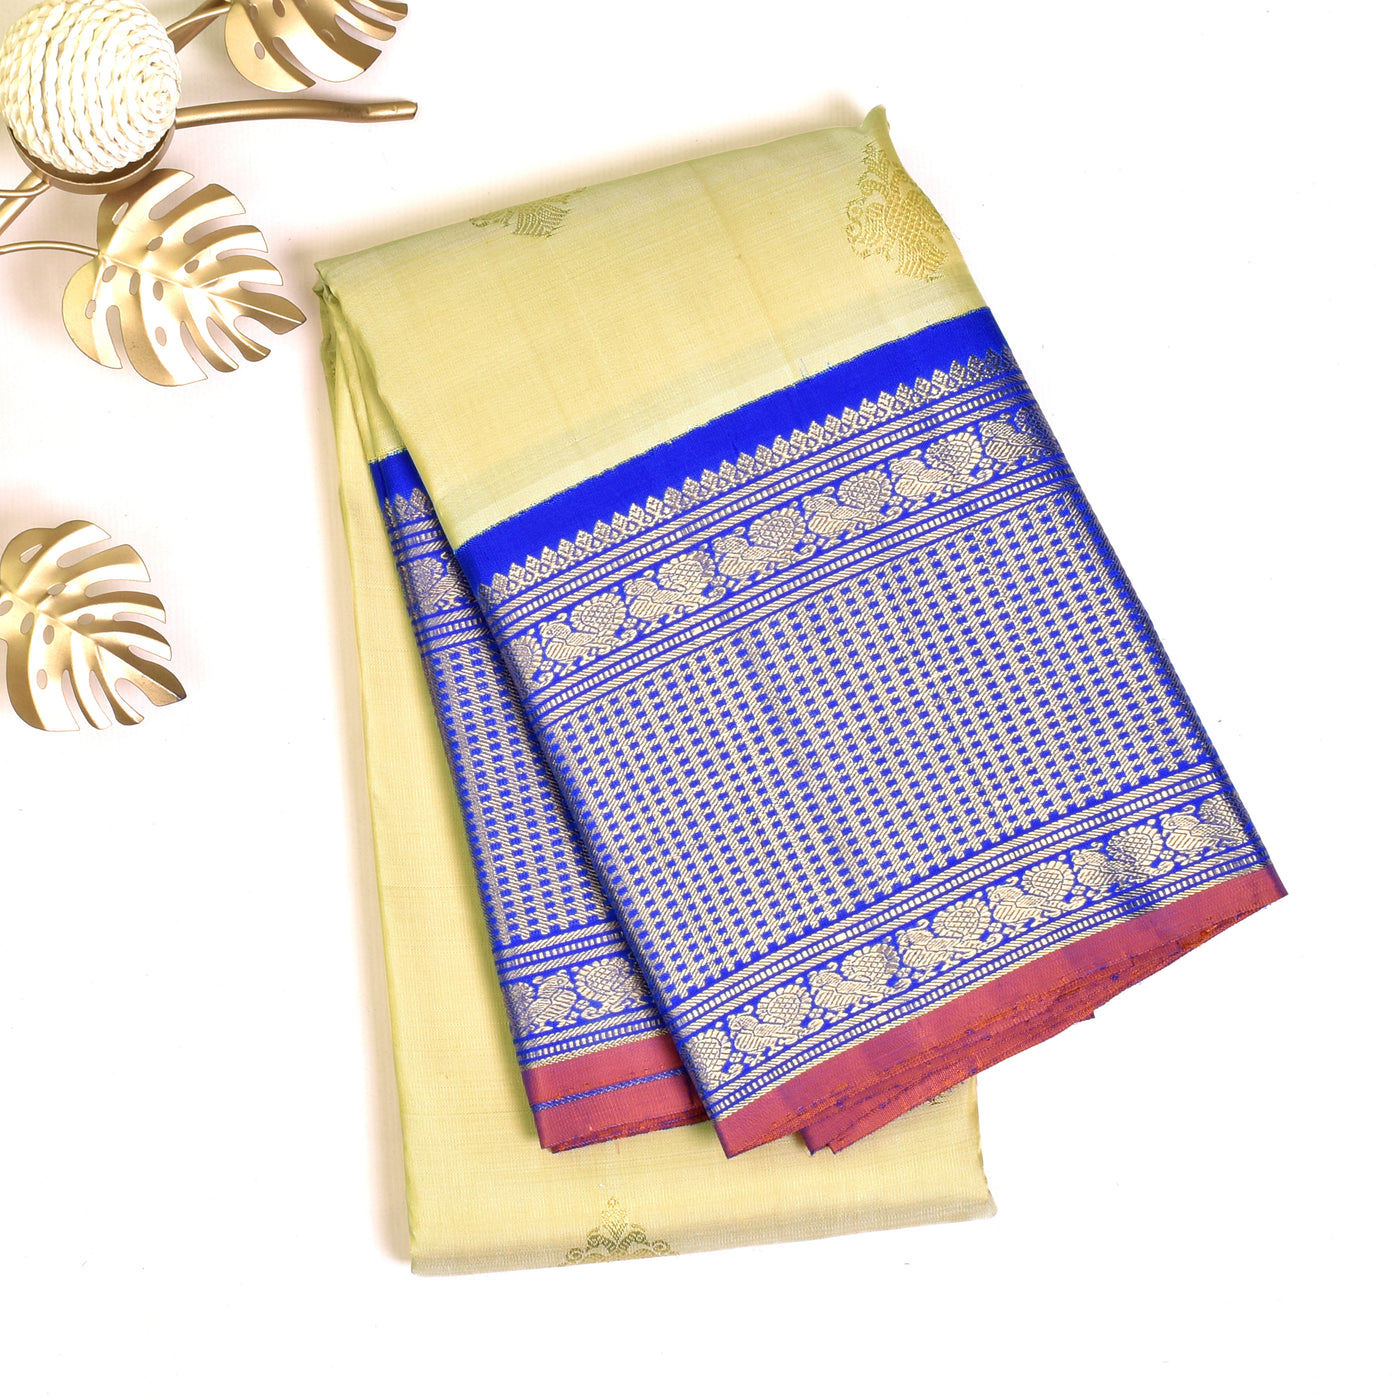 off-white-kanchi-silk-saree-with-ms-blue-pallu-and-blouse